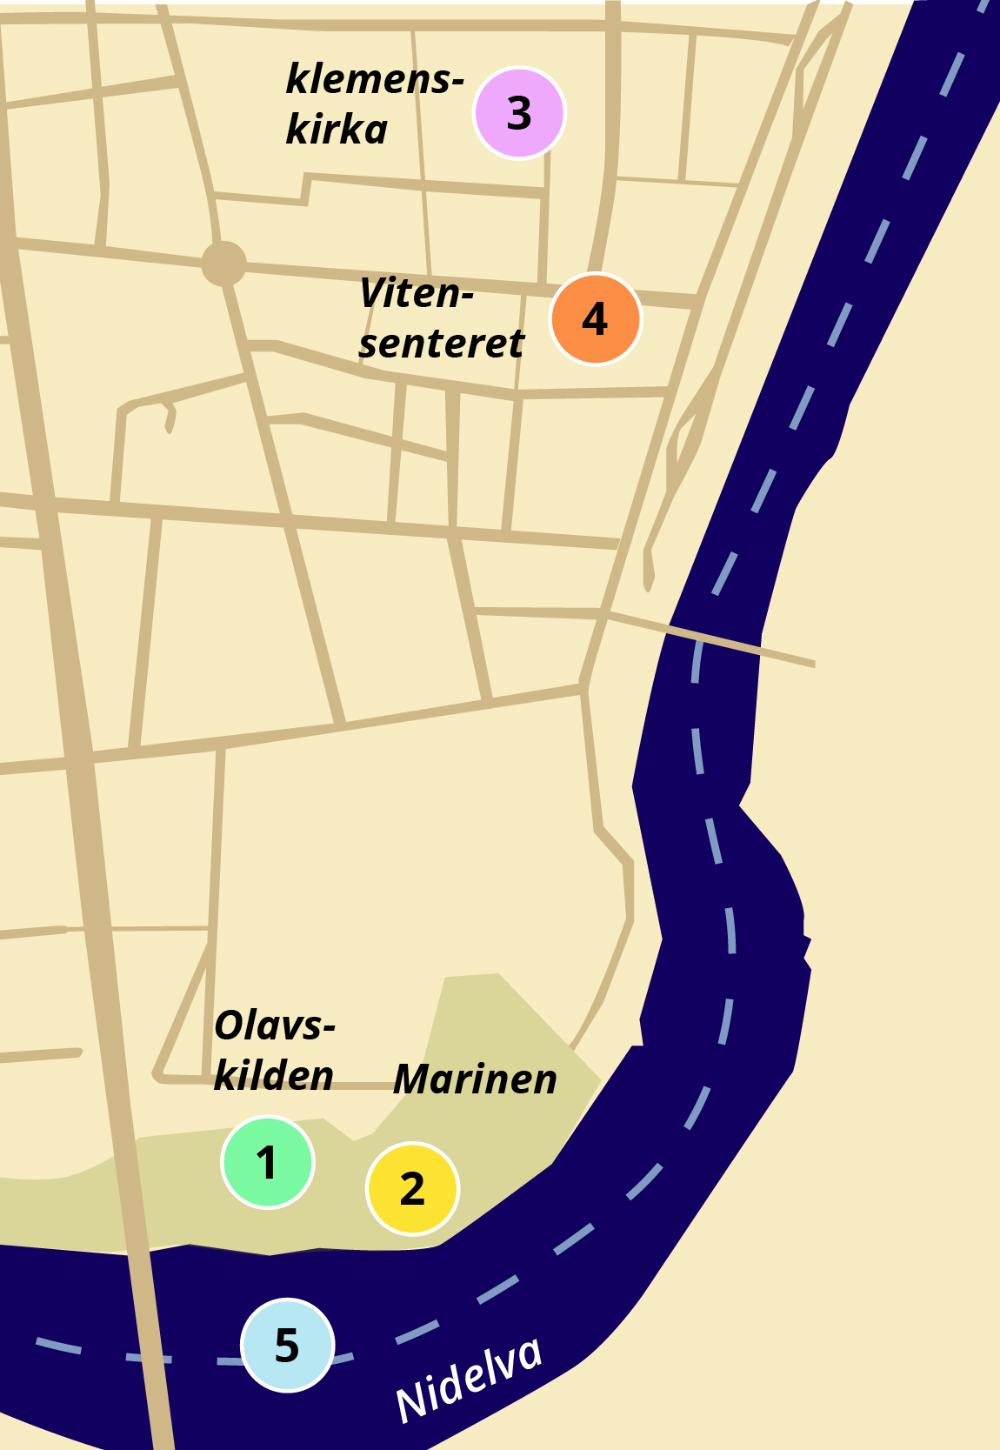 Map with numbers 1-5 for each art project location